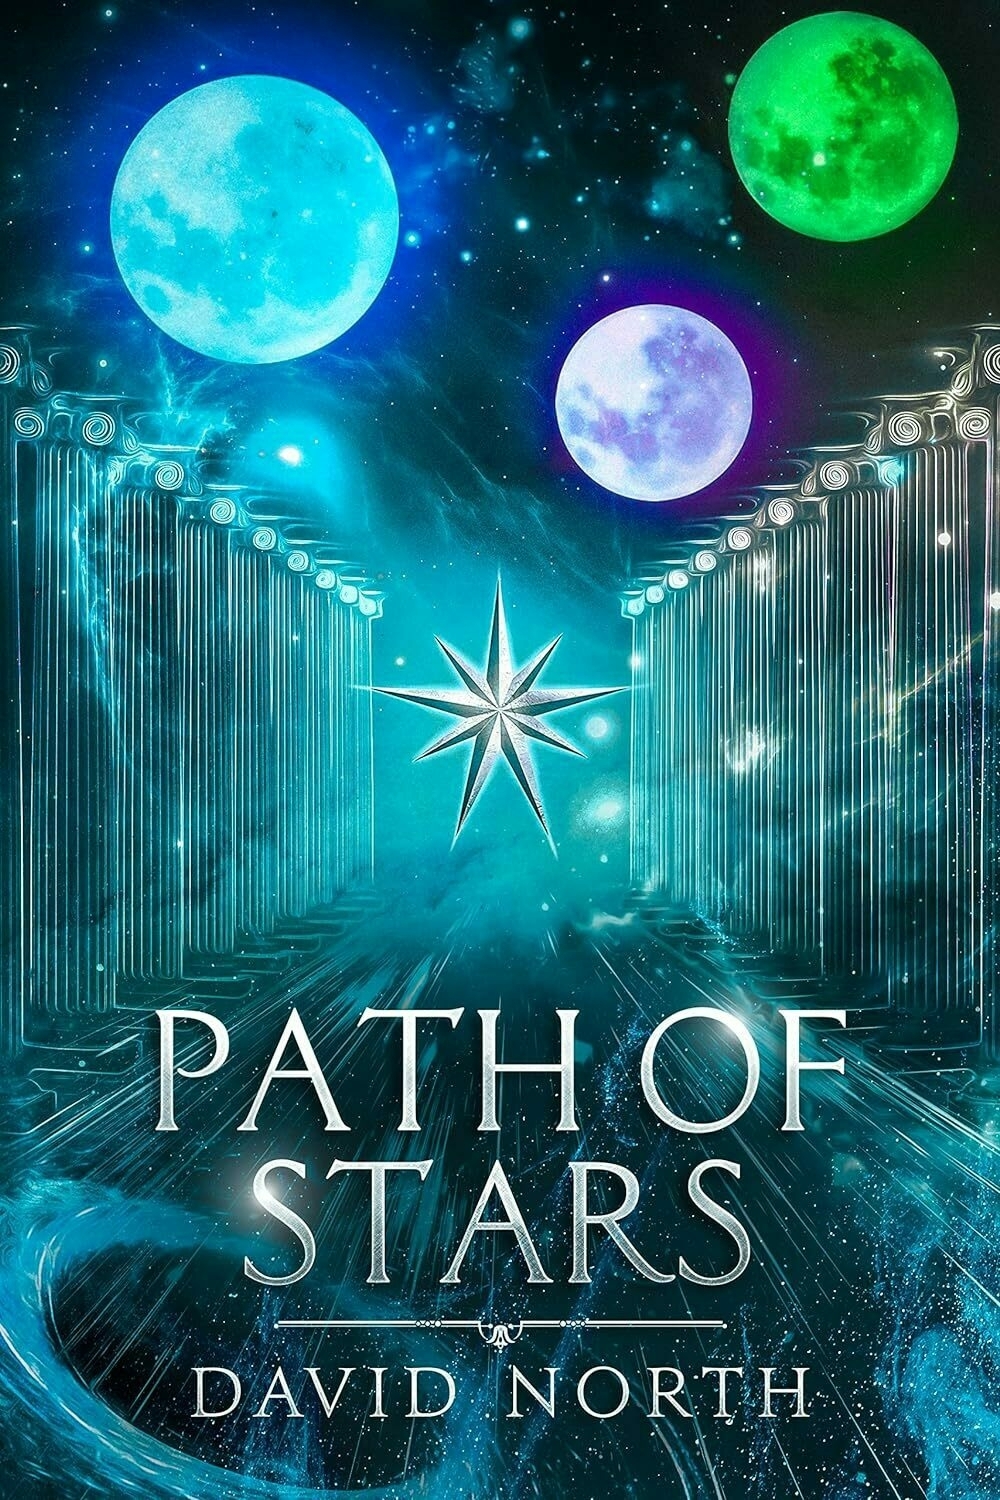 A book cover displays 'PATH OF STARS' in large letters with the author's name 'David North' below. Three moons, a compass rose, and celestial elements set against a starry sky above classical columns.